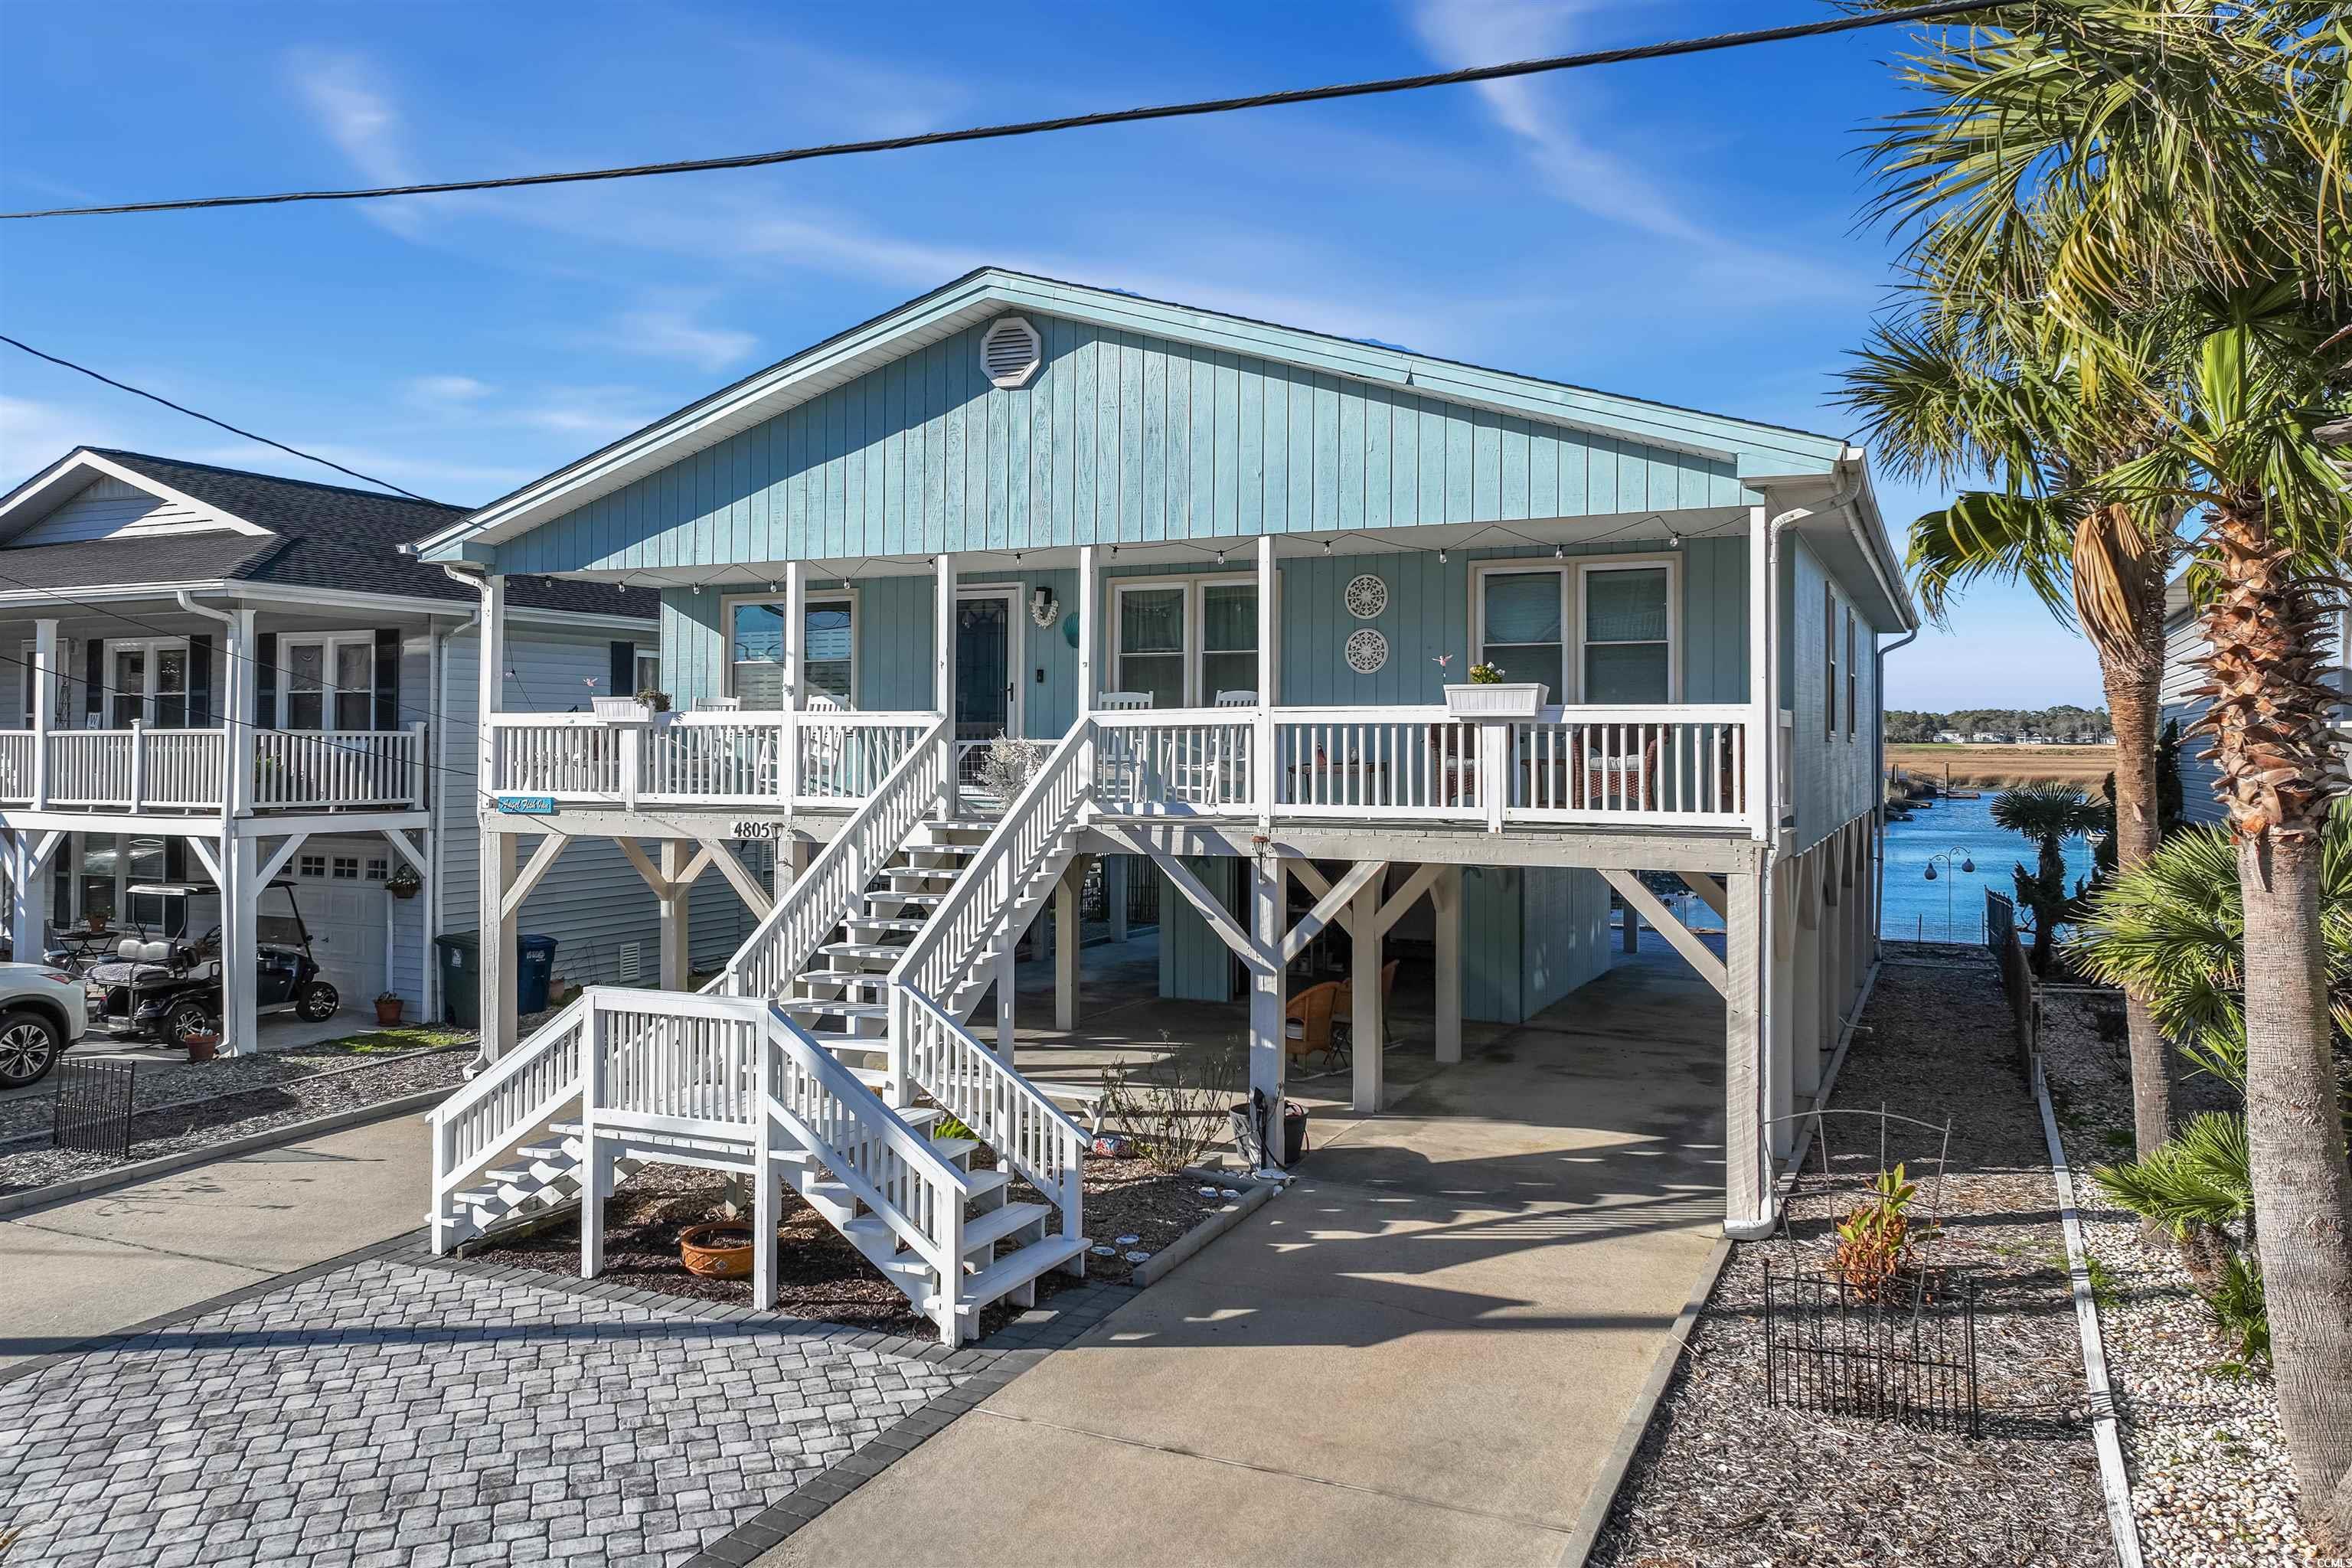 welcome to this peaceful oasis, perfectly situated at the end of a cherry grove channel leading to deep water access. this home has 4-bedrooms and 2-full baths, an elevator and 1 car private garage underneath this raised beach style home. the rear yard has a new 2017 seawall and beautiful paver-work with a matching pavered fire pit. a true treasure that offers breathtaking water views that define the essence of cherry grove living. the open floor plan invites you to spacious bedrooms adorned with recently upgraded flooring. the kitchen looks directly out to the channel through a panoramic view. enjoy upgraded features such as quartz countertops, a stylish backsplash, and stainless steel appliances. the master bedroom even has channel views from the master closet area. the roof was replaced in 2020, and a hvac system with fresh ductwork, there is also a generator for the property, all contributing to a modernized living experience. indulge in relaxation on the expansive covered porch, complete with rockers, where the soothing ocean sounds accompany glimpses of the waves. alternatively, savor tranquility on the back patio, soaking in the mesmerizing views of the peaceful channel. this home is a haven of comfort and coastal charm, seamlessly blending style with the allure of waterfront living. schedule a private showing today.